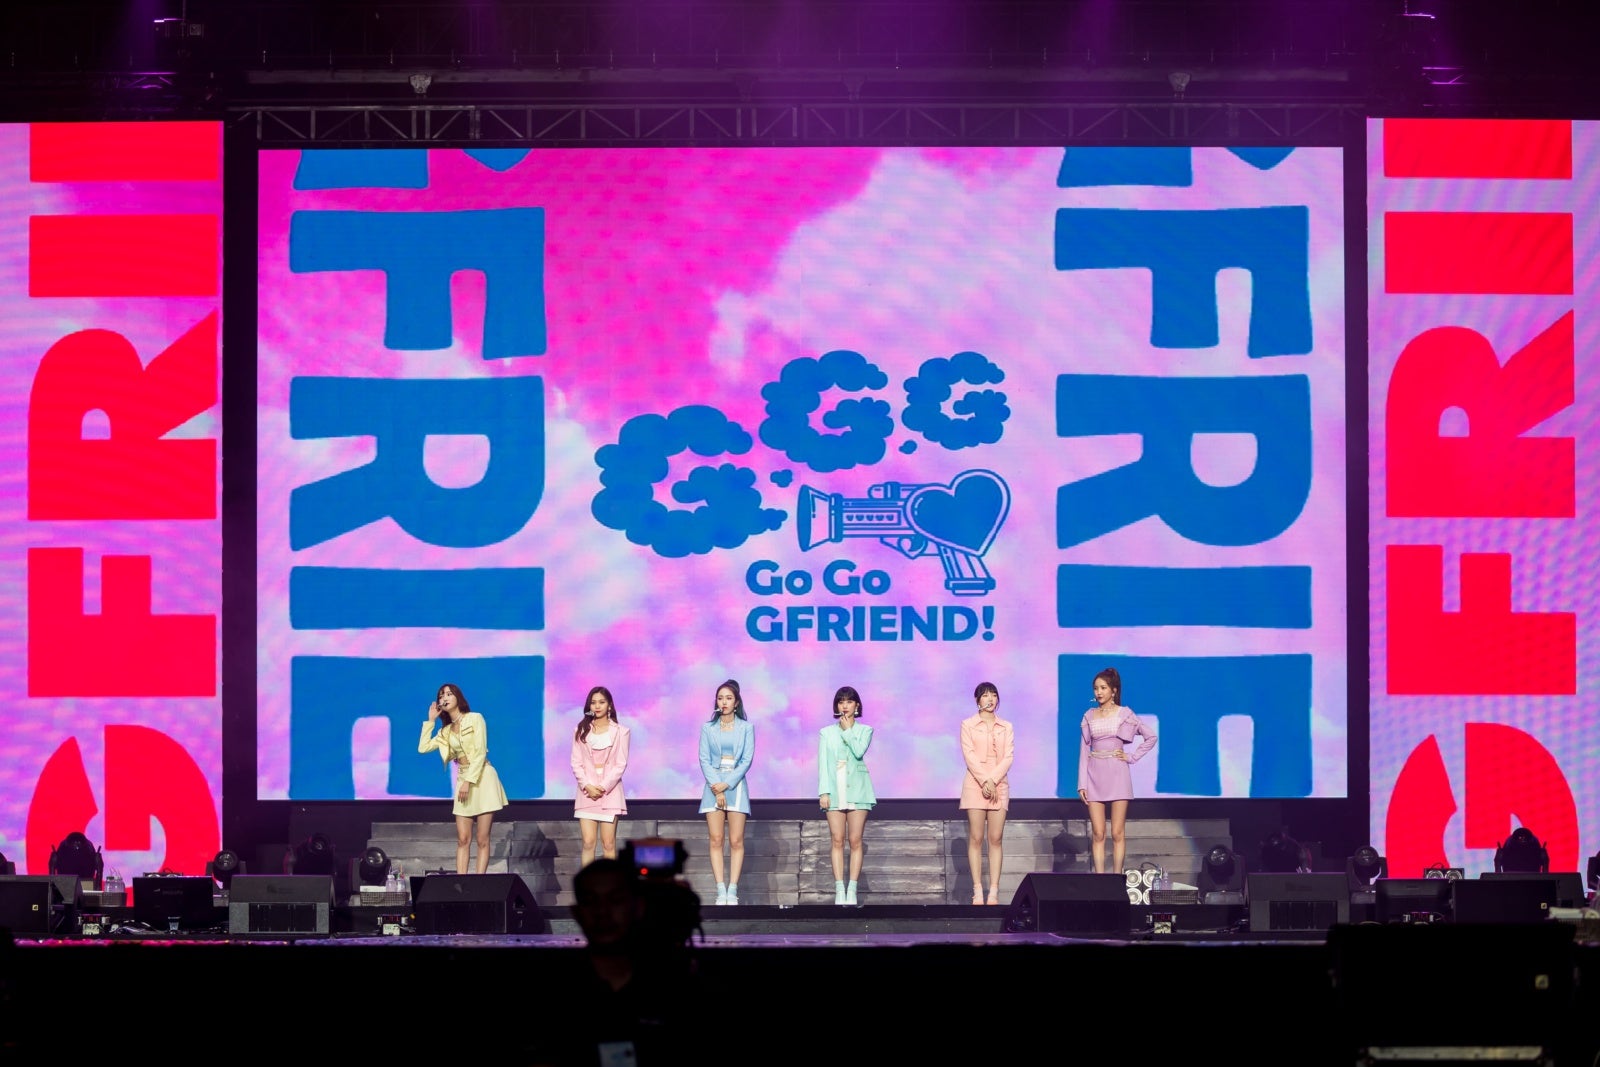 &Quot;Baby Sayang, Saya Suka Kamu,&Quot; Gfriend Wows Malaysian Fans With Bm Phrases During Their Concert - World Of Buzz 1